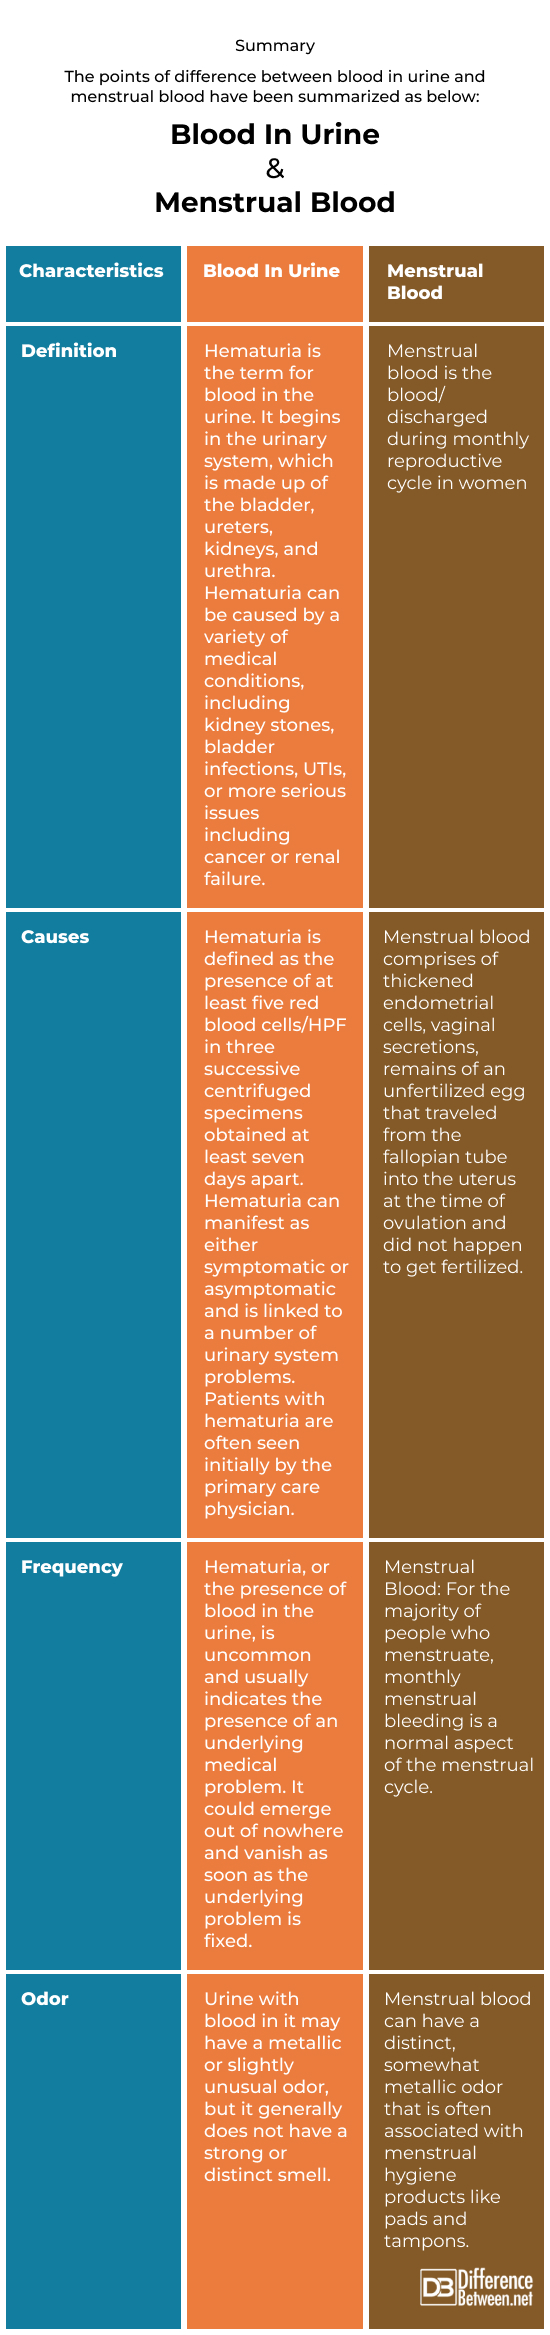 blood in urine and menstrual blood